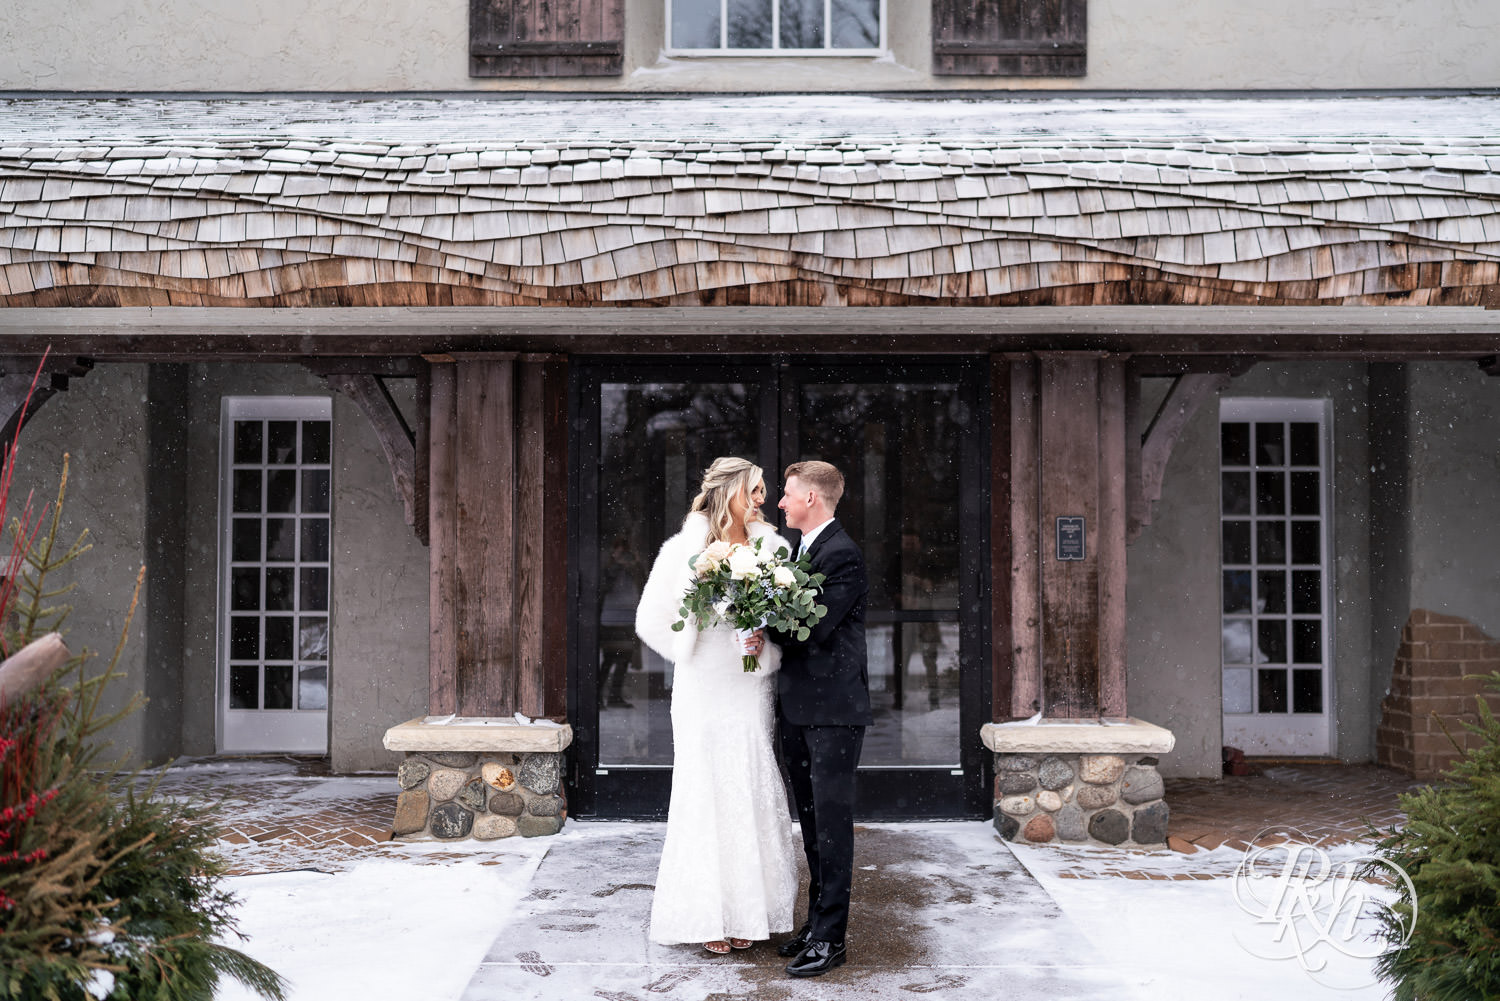 Bride and groom smile in the snow during winter wedding photography at Bavaria Downs in Chaska, Minnesota.